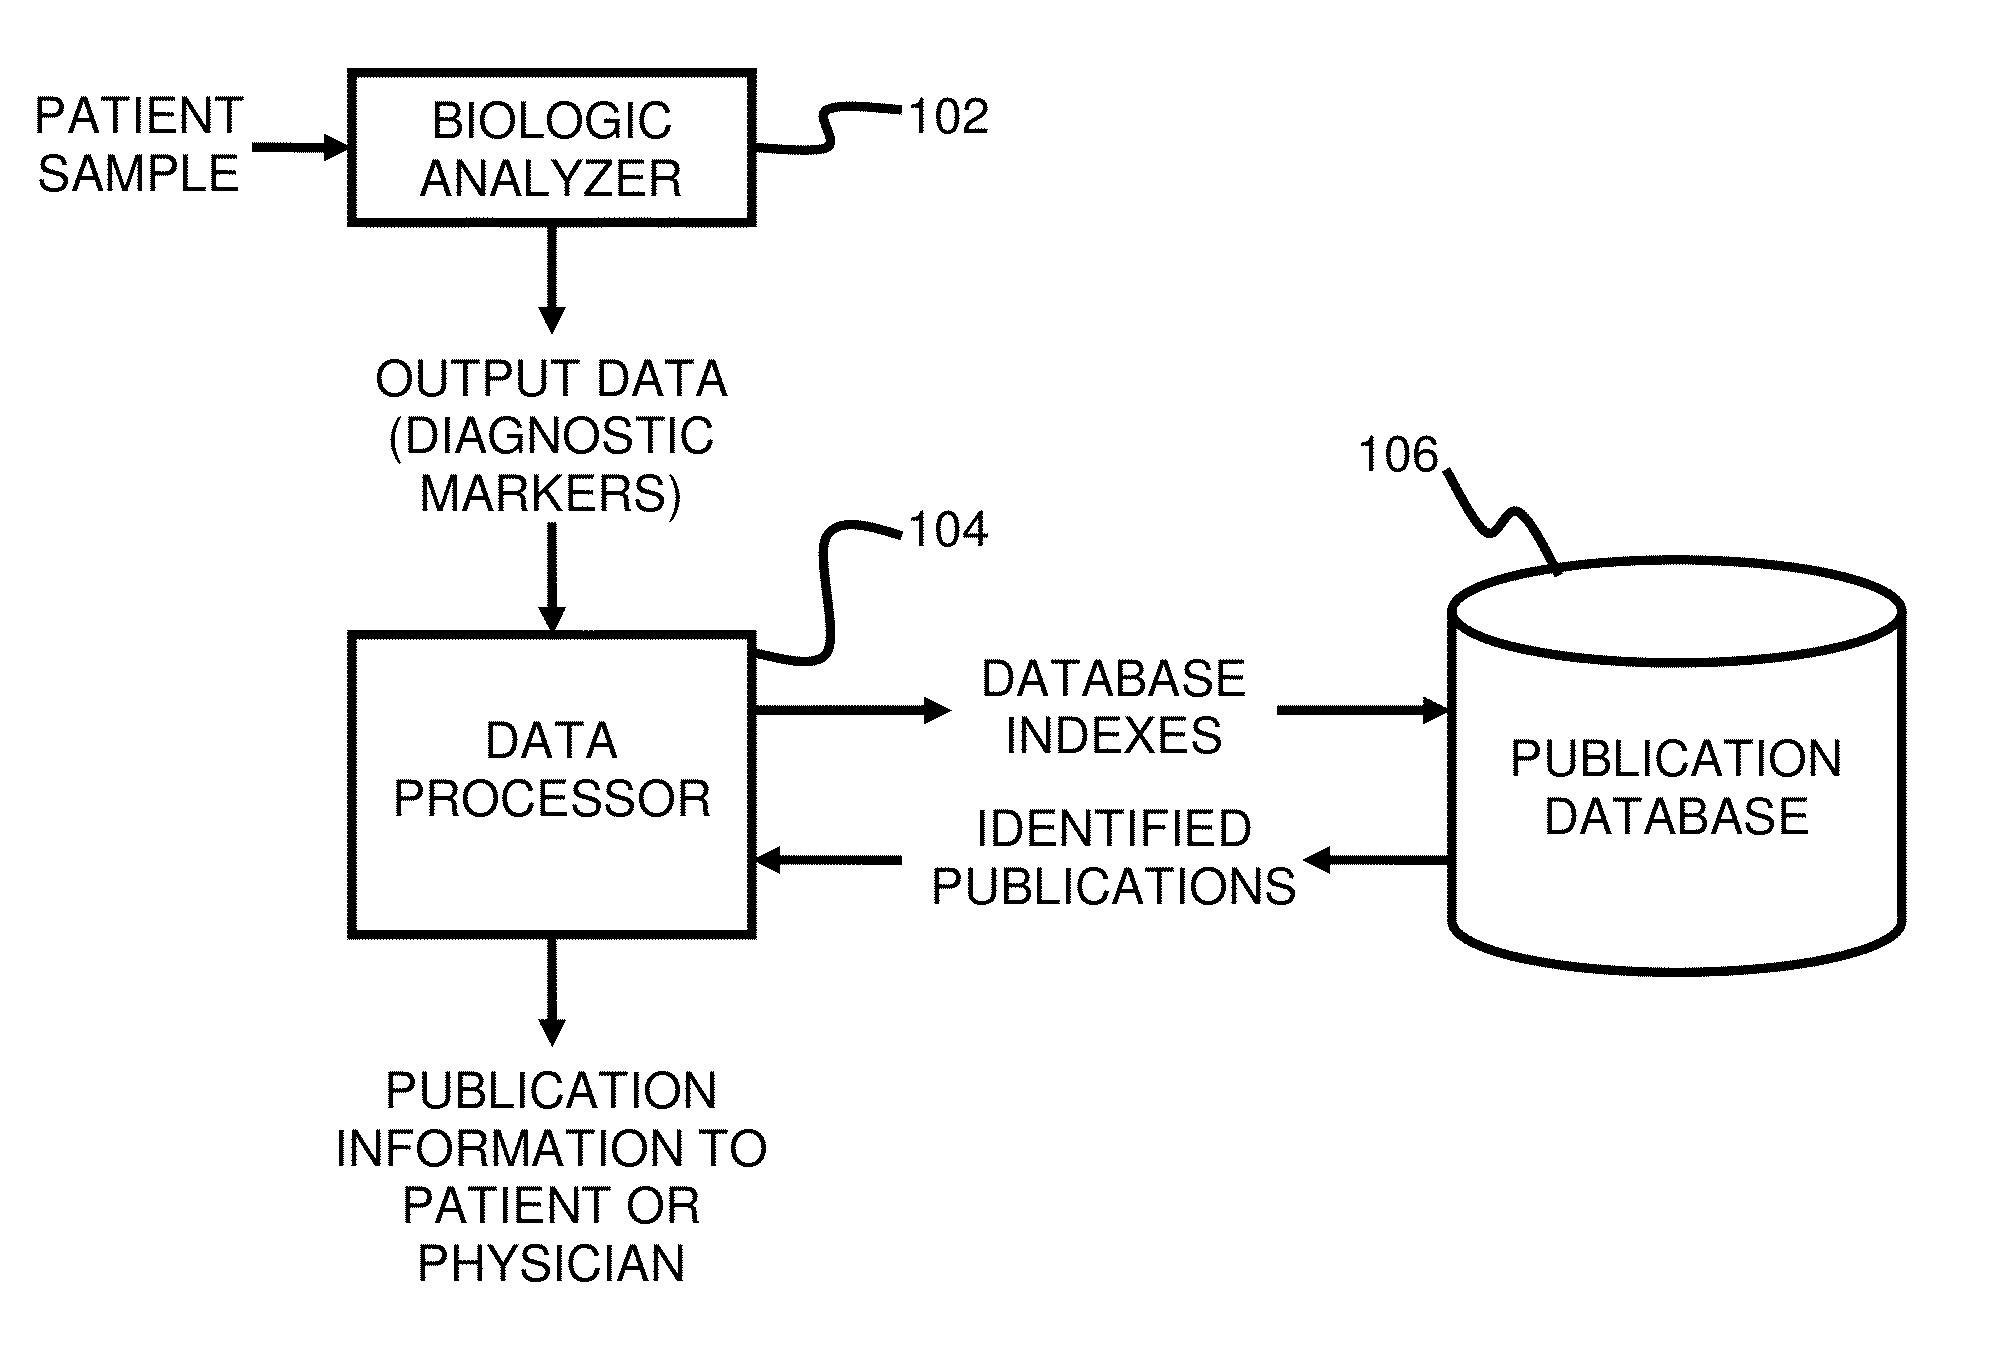 System and method for targeting relevant research activity in response to diagnostic marker analyses